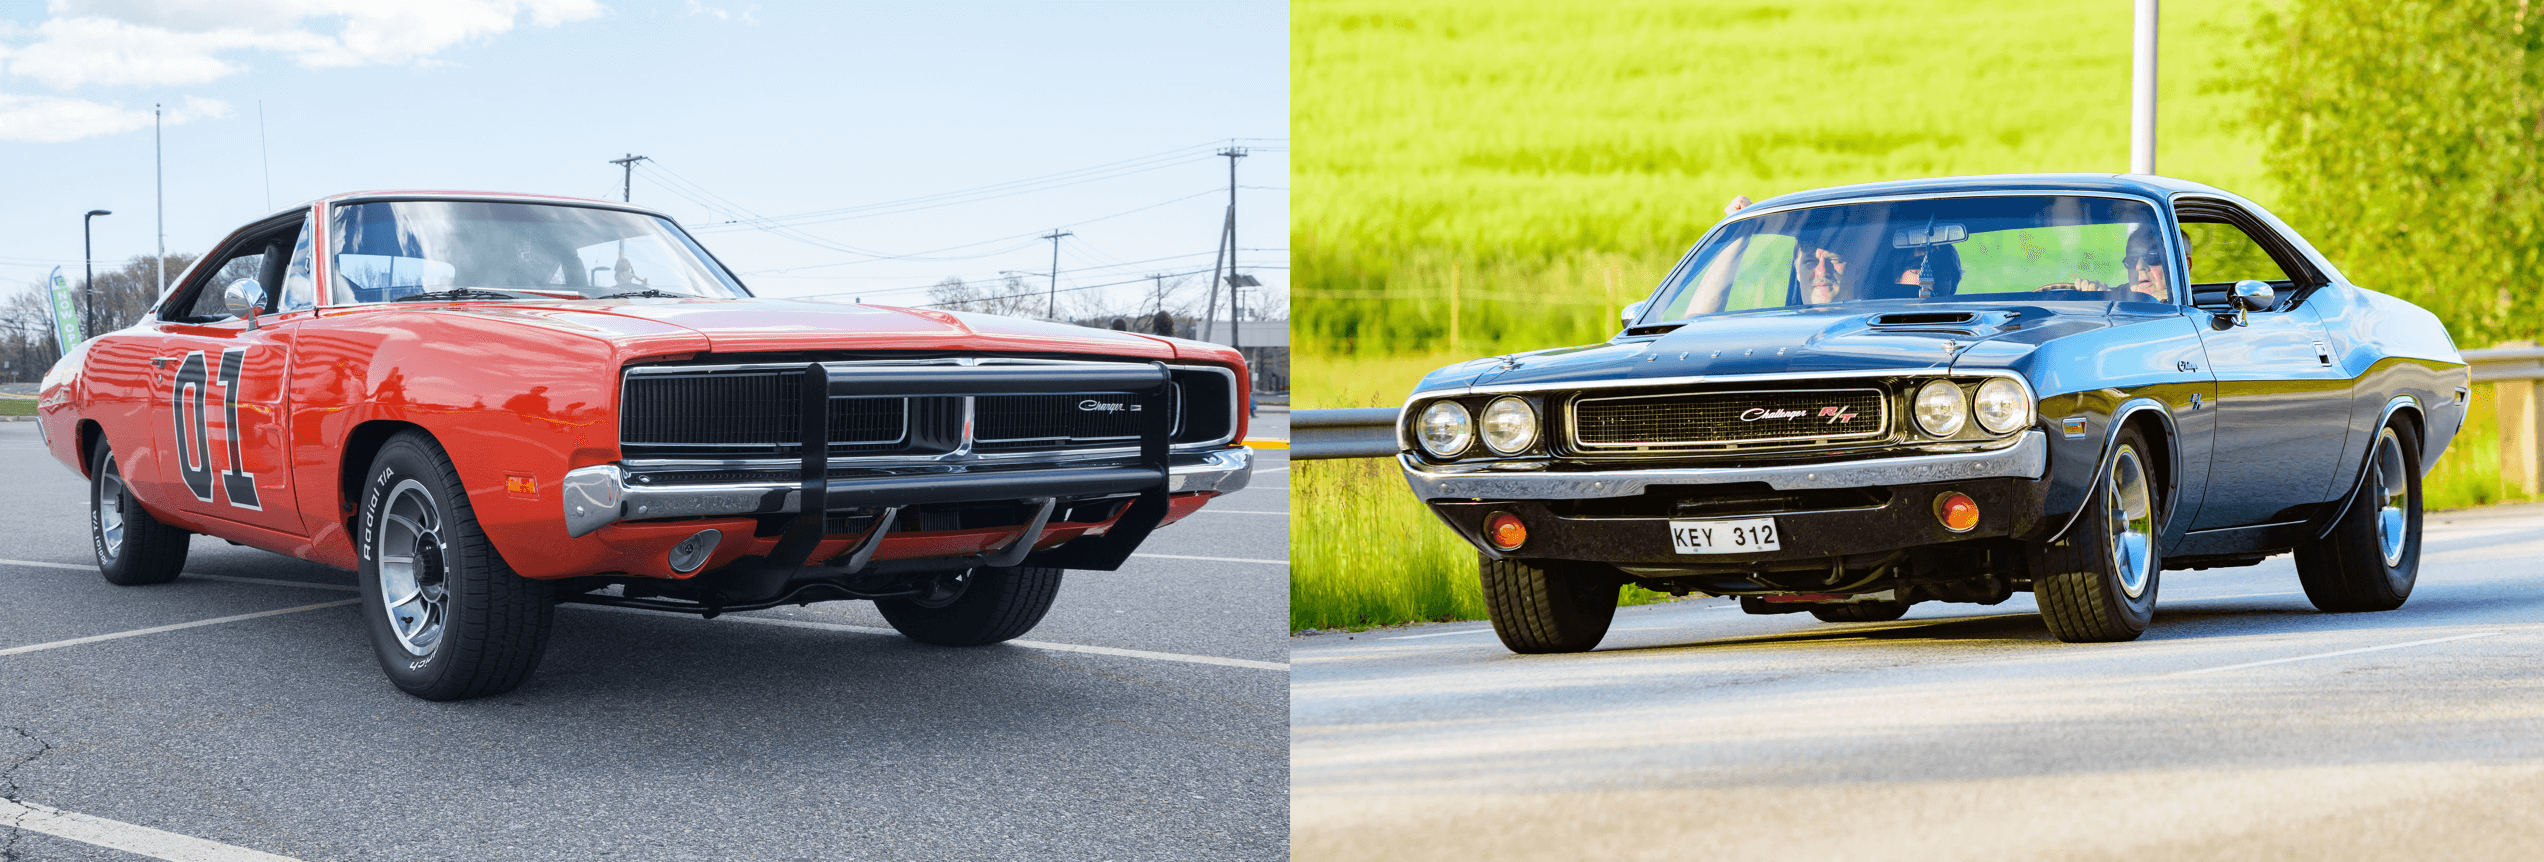 Charger vs Challenger: Which Classic Dodge Comes Out on Top?